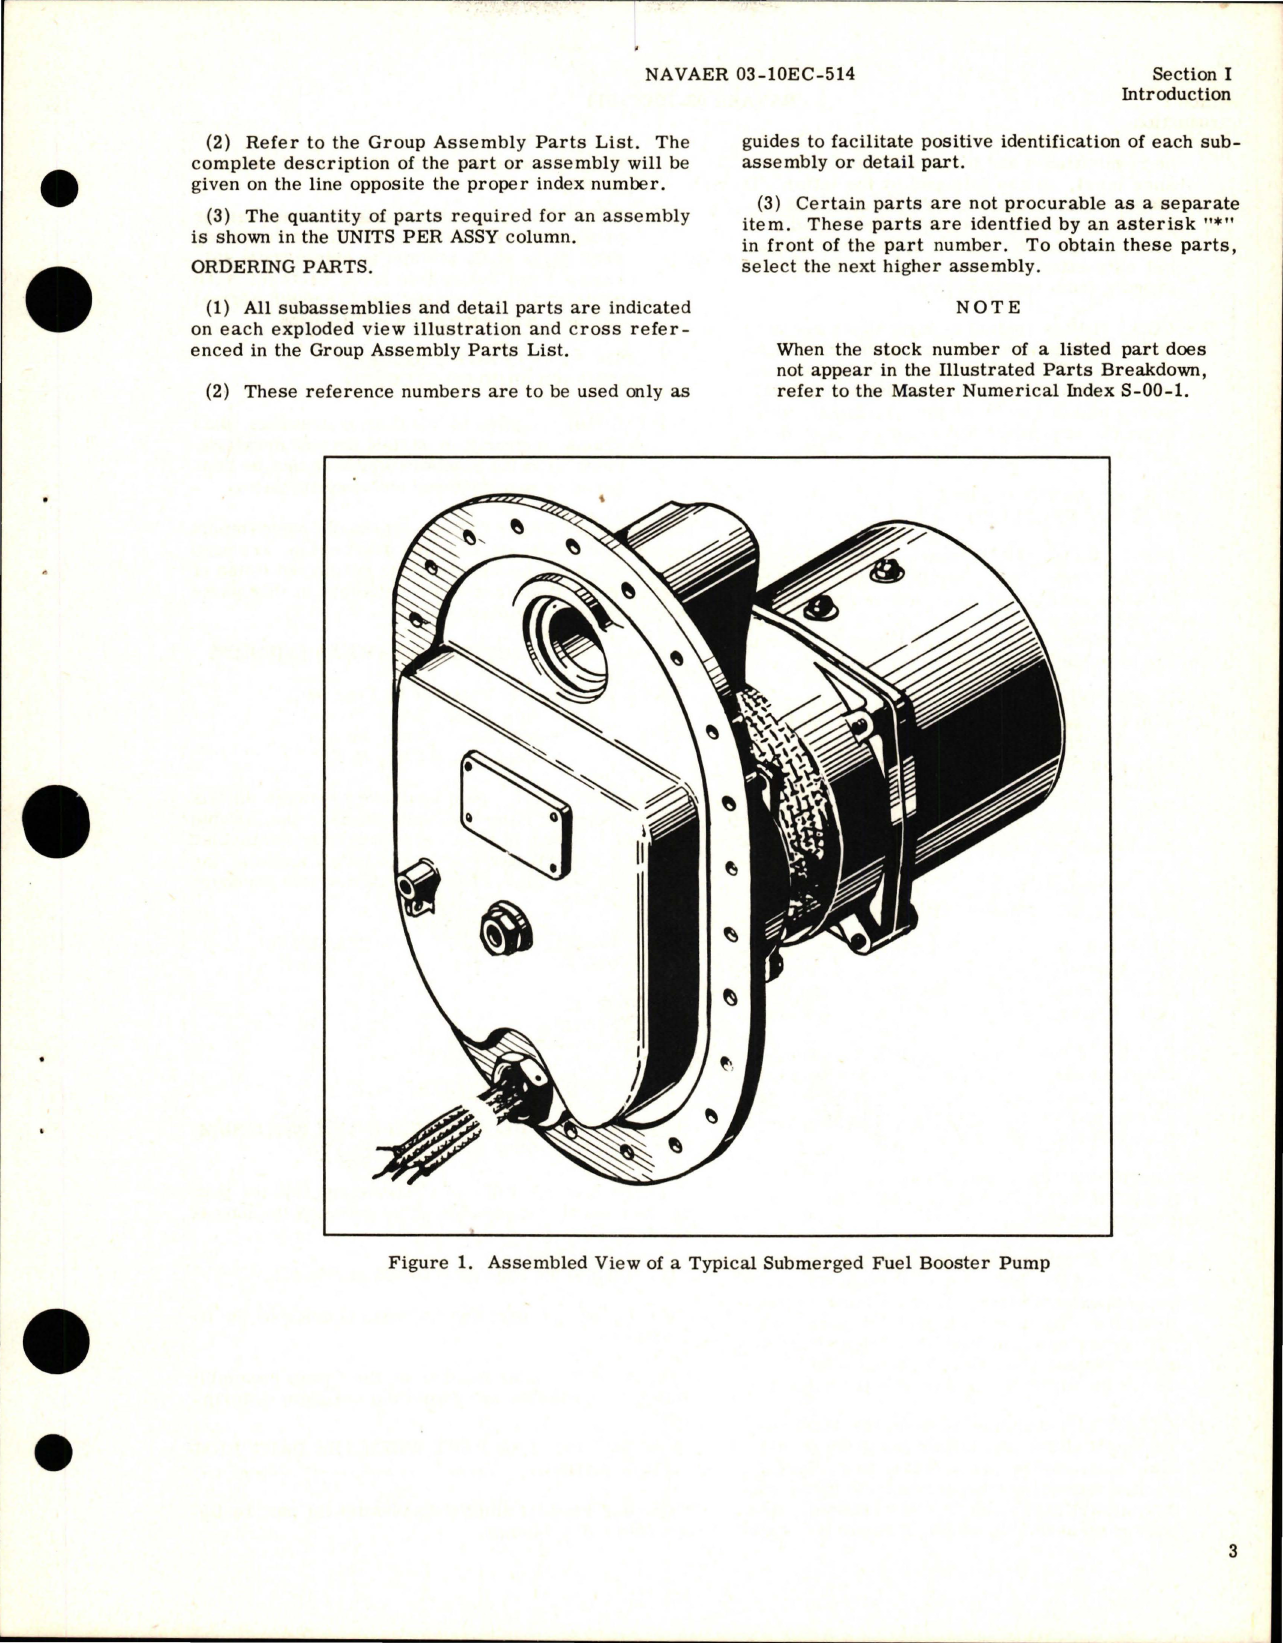 Sample page 5 from AirCorps Library document: Illustrated Parts Breakdown for Submerged Fuel Booster Pump - Models TF54500, TF54500-1, and TF54500-6